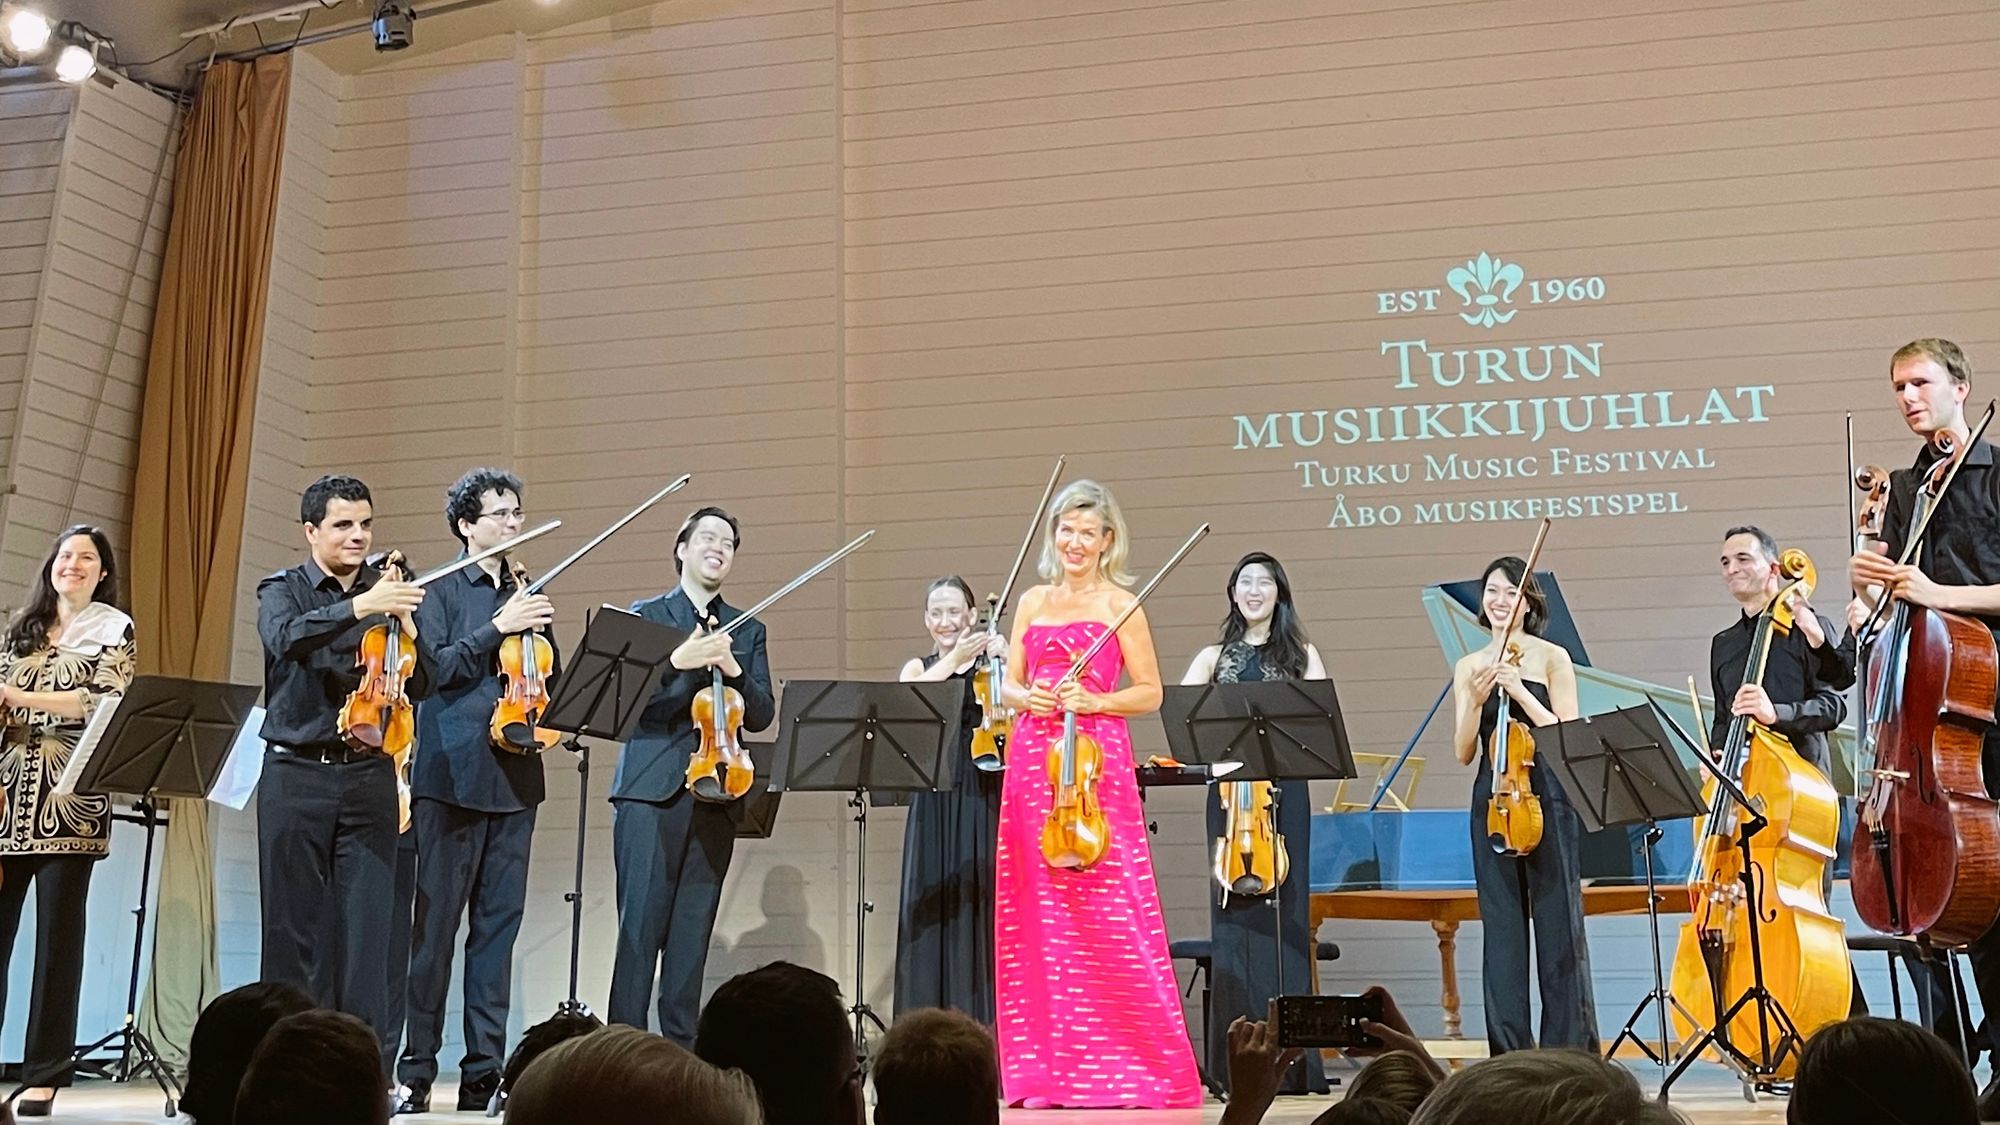 The complete elegance of the violinist Anne-Sophie Mutter🎻